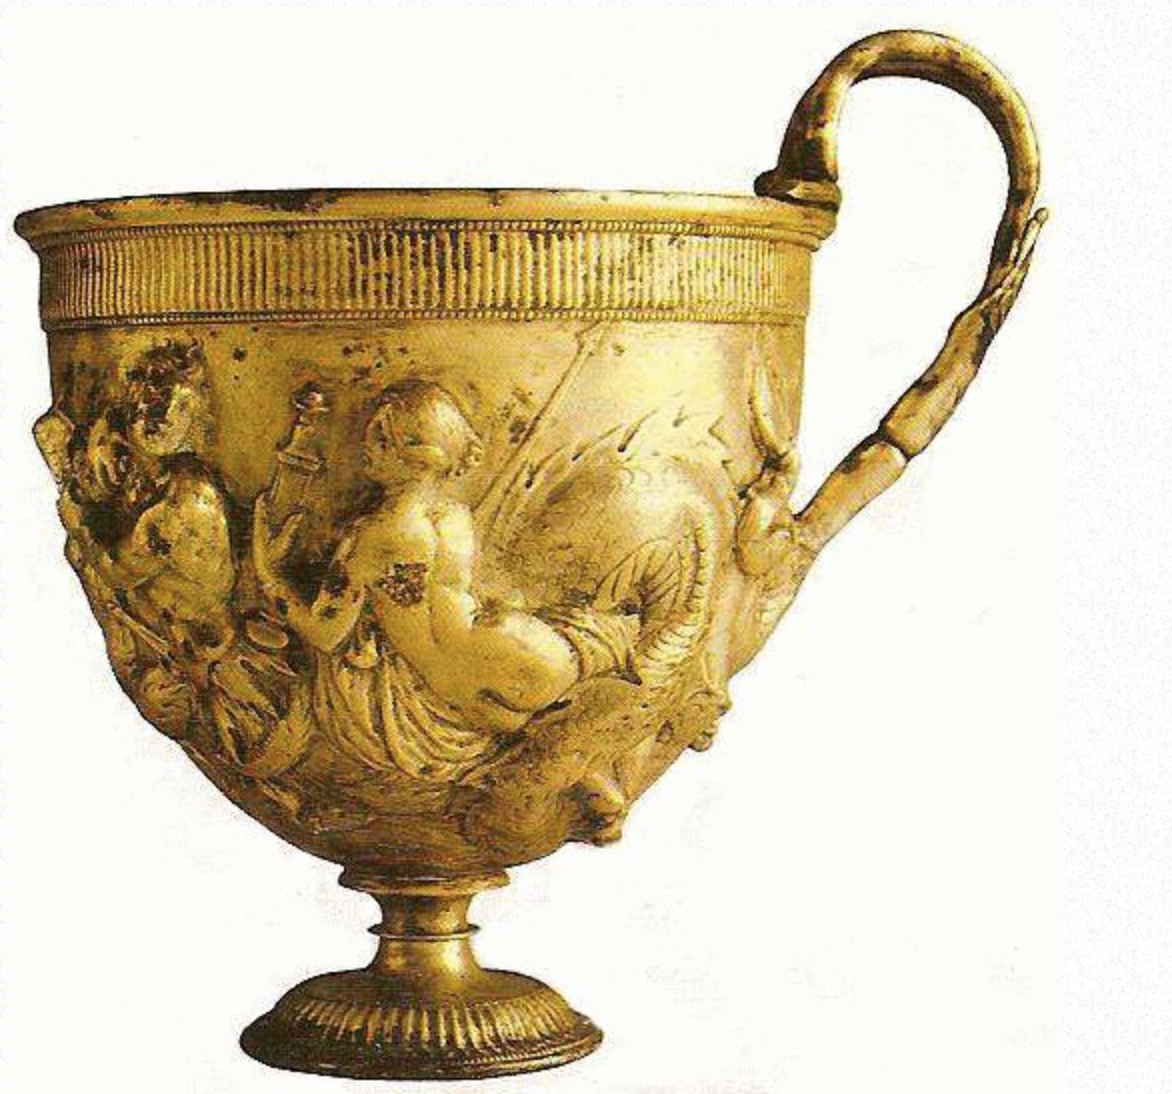 fascinating artifacts - Beautiful Roman gold cup, found in Pompeii. Dated to I century BCE.